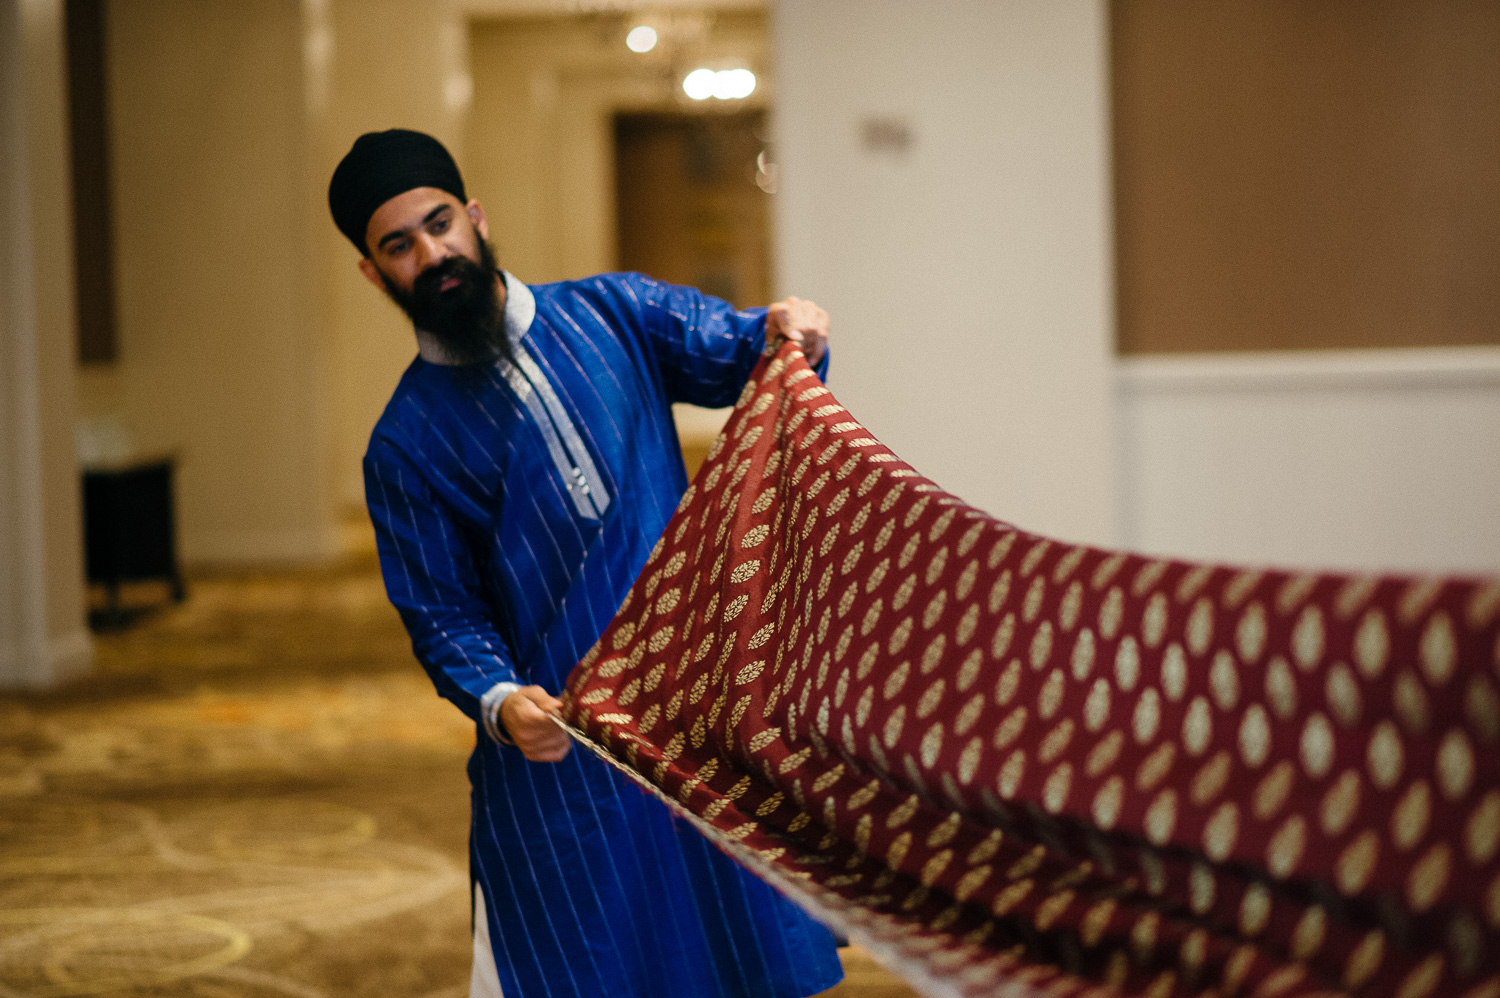 The safa or in this case a long piece of fabric is prepared for the groom Hindu Jewish fusion wedding Sugar Land Marriott Hotel Texas-026